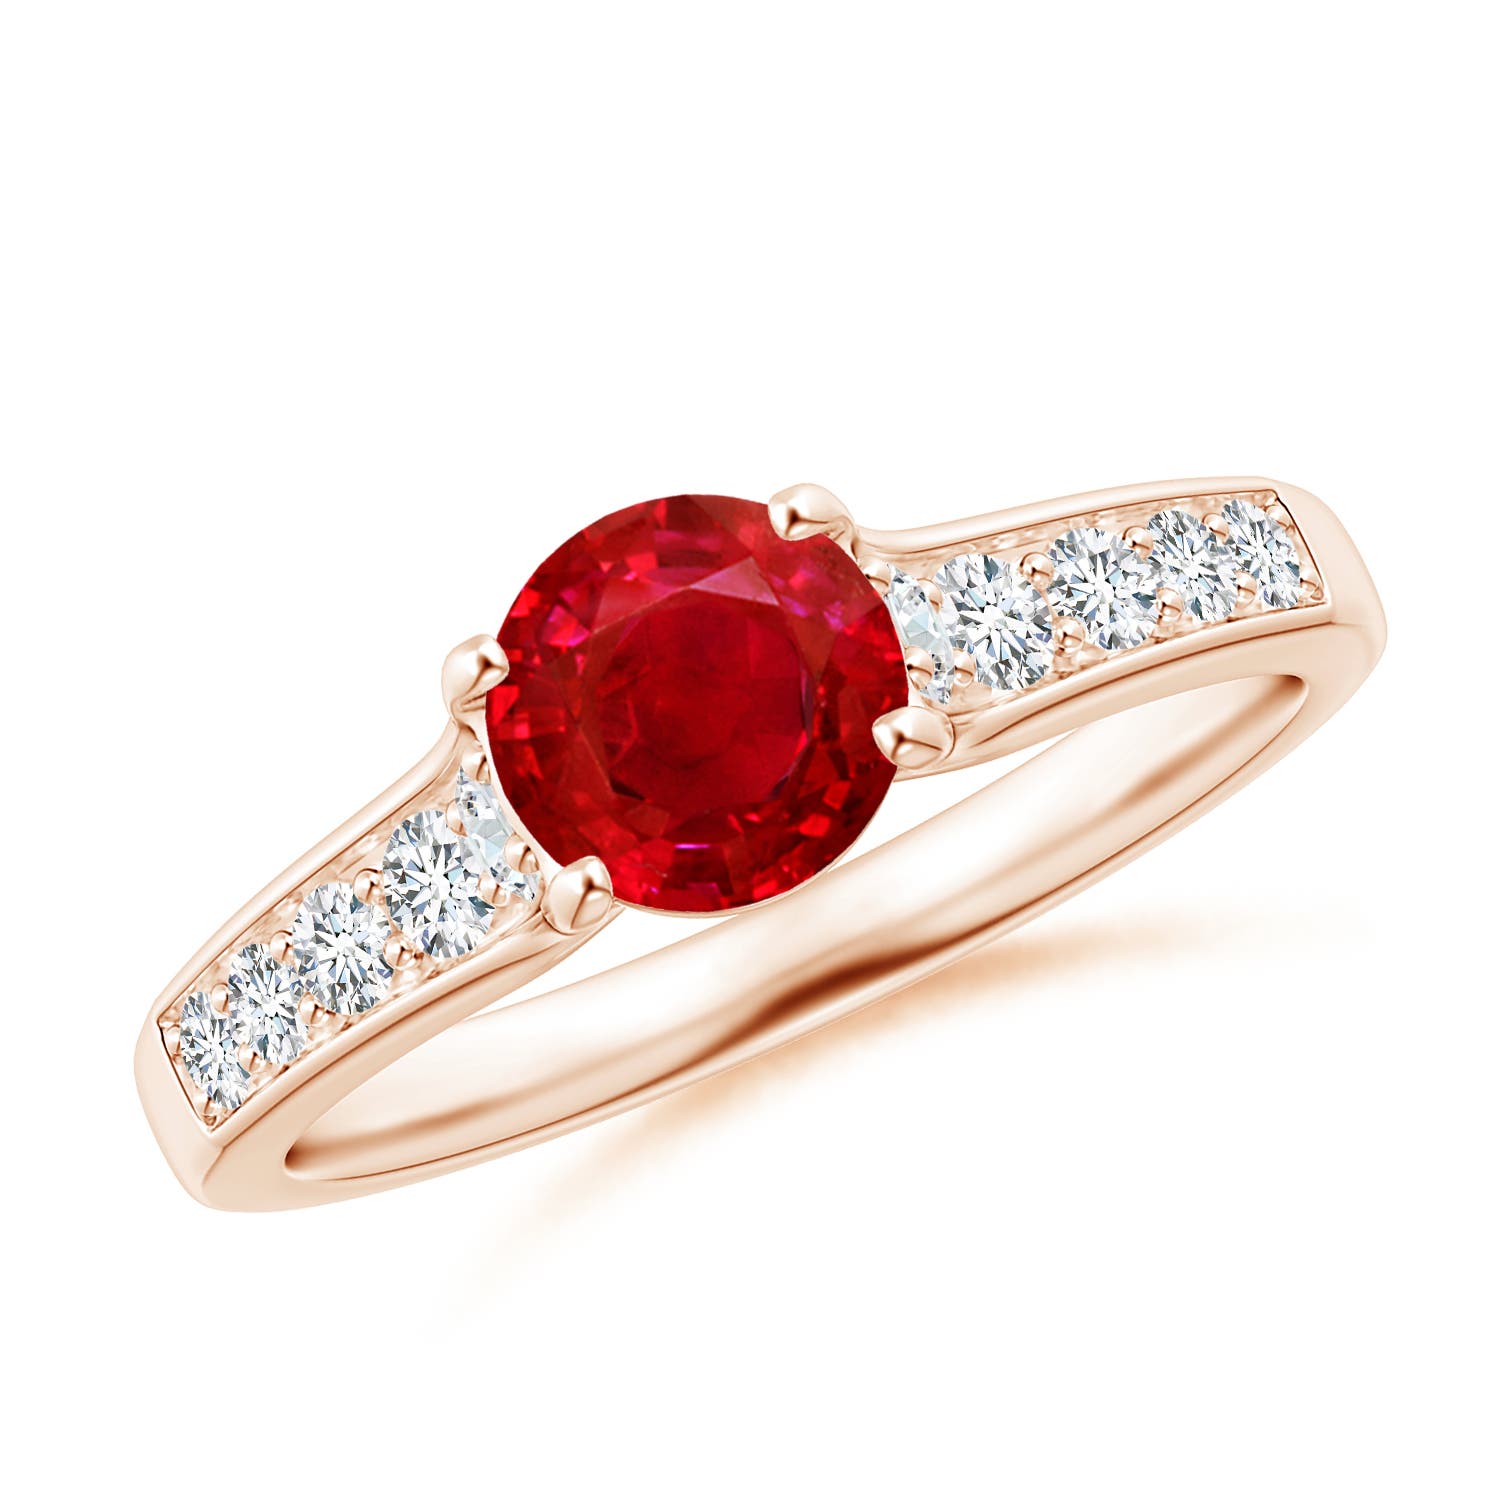 AAA - Ruby / 1.38 CT / 14 KT Rose Gold